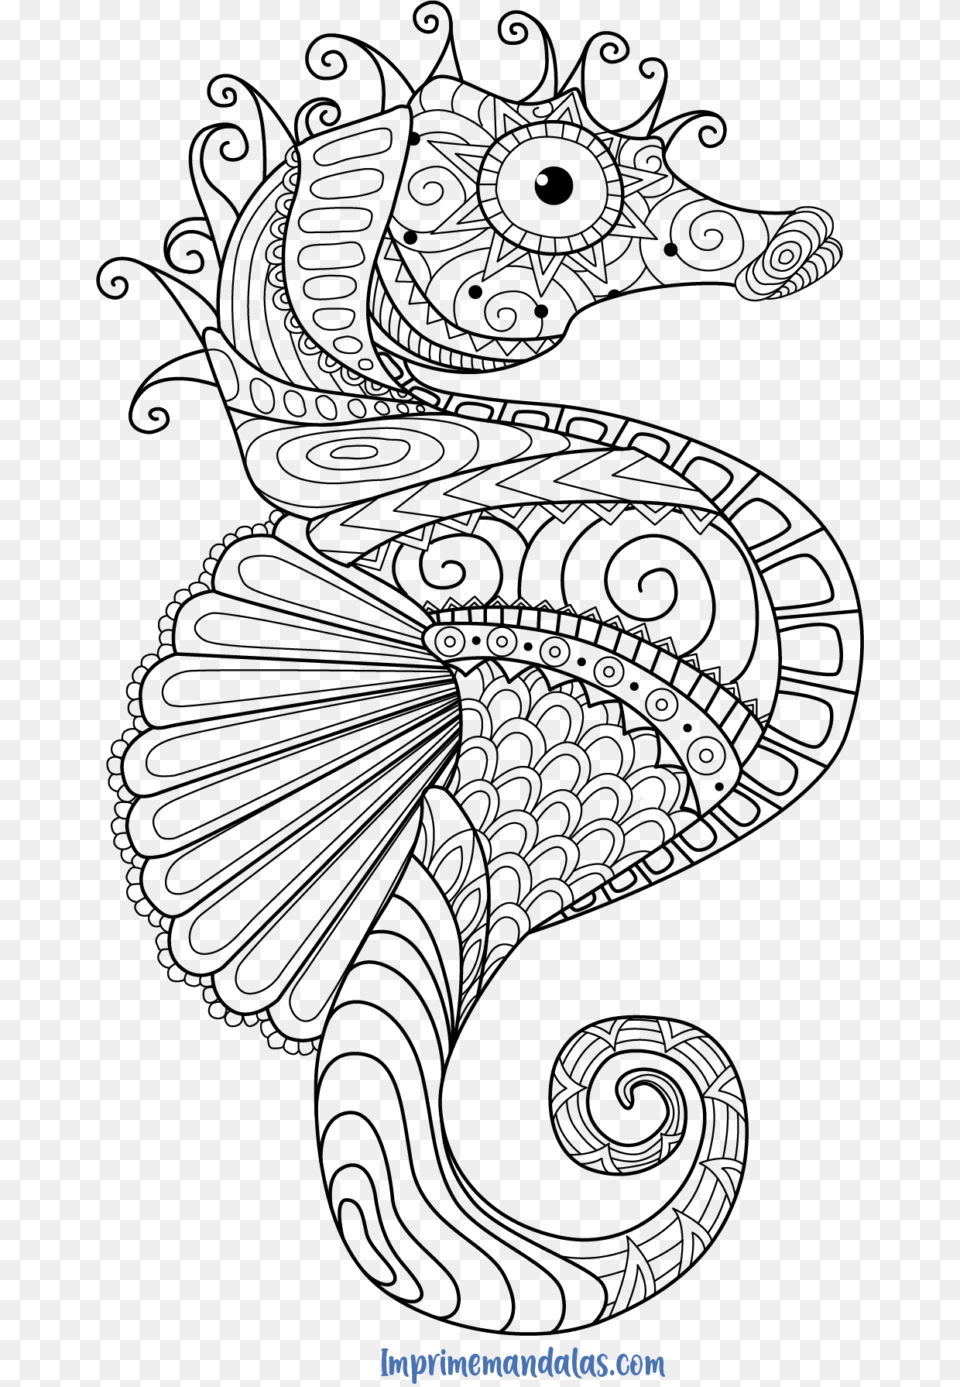 Mandala Caballito De Mar Para Colorear Seahorse Coloring Pages For Adults, Nature, Night, Outdoors, Astronomy Png Image